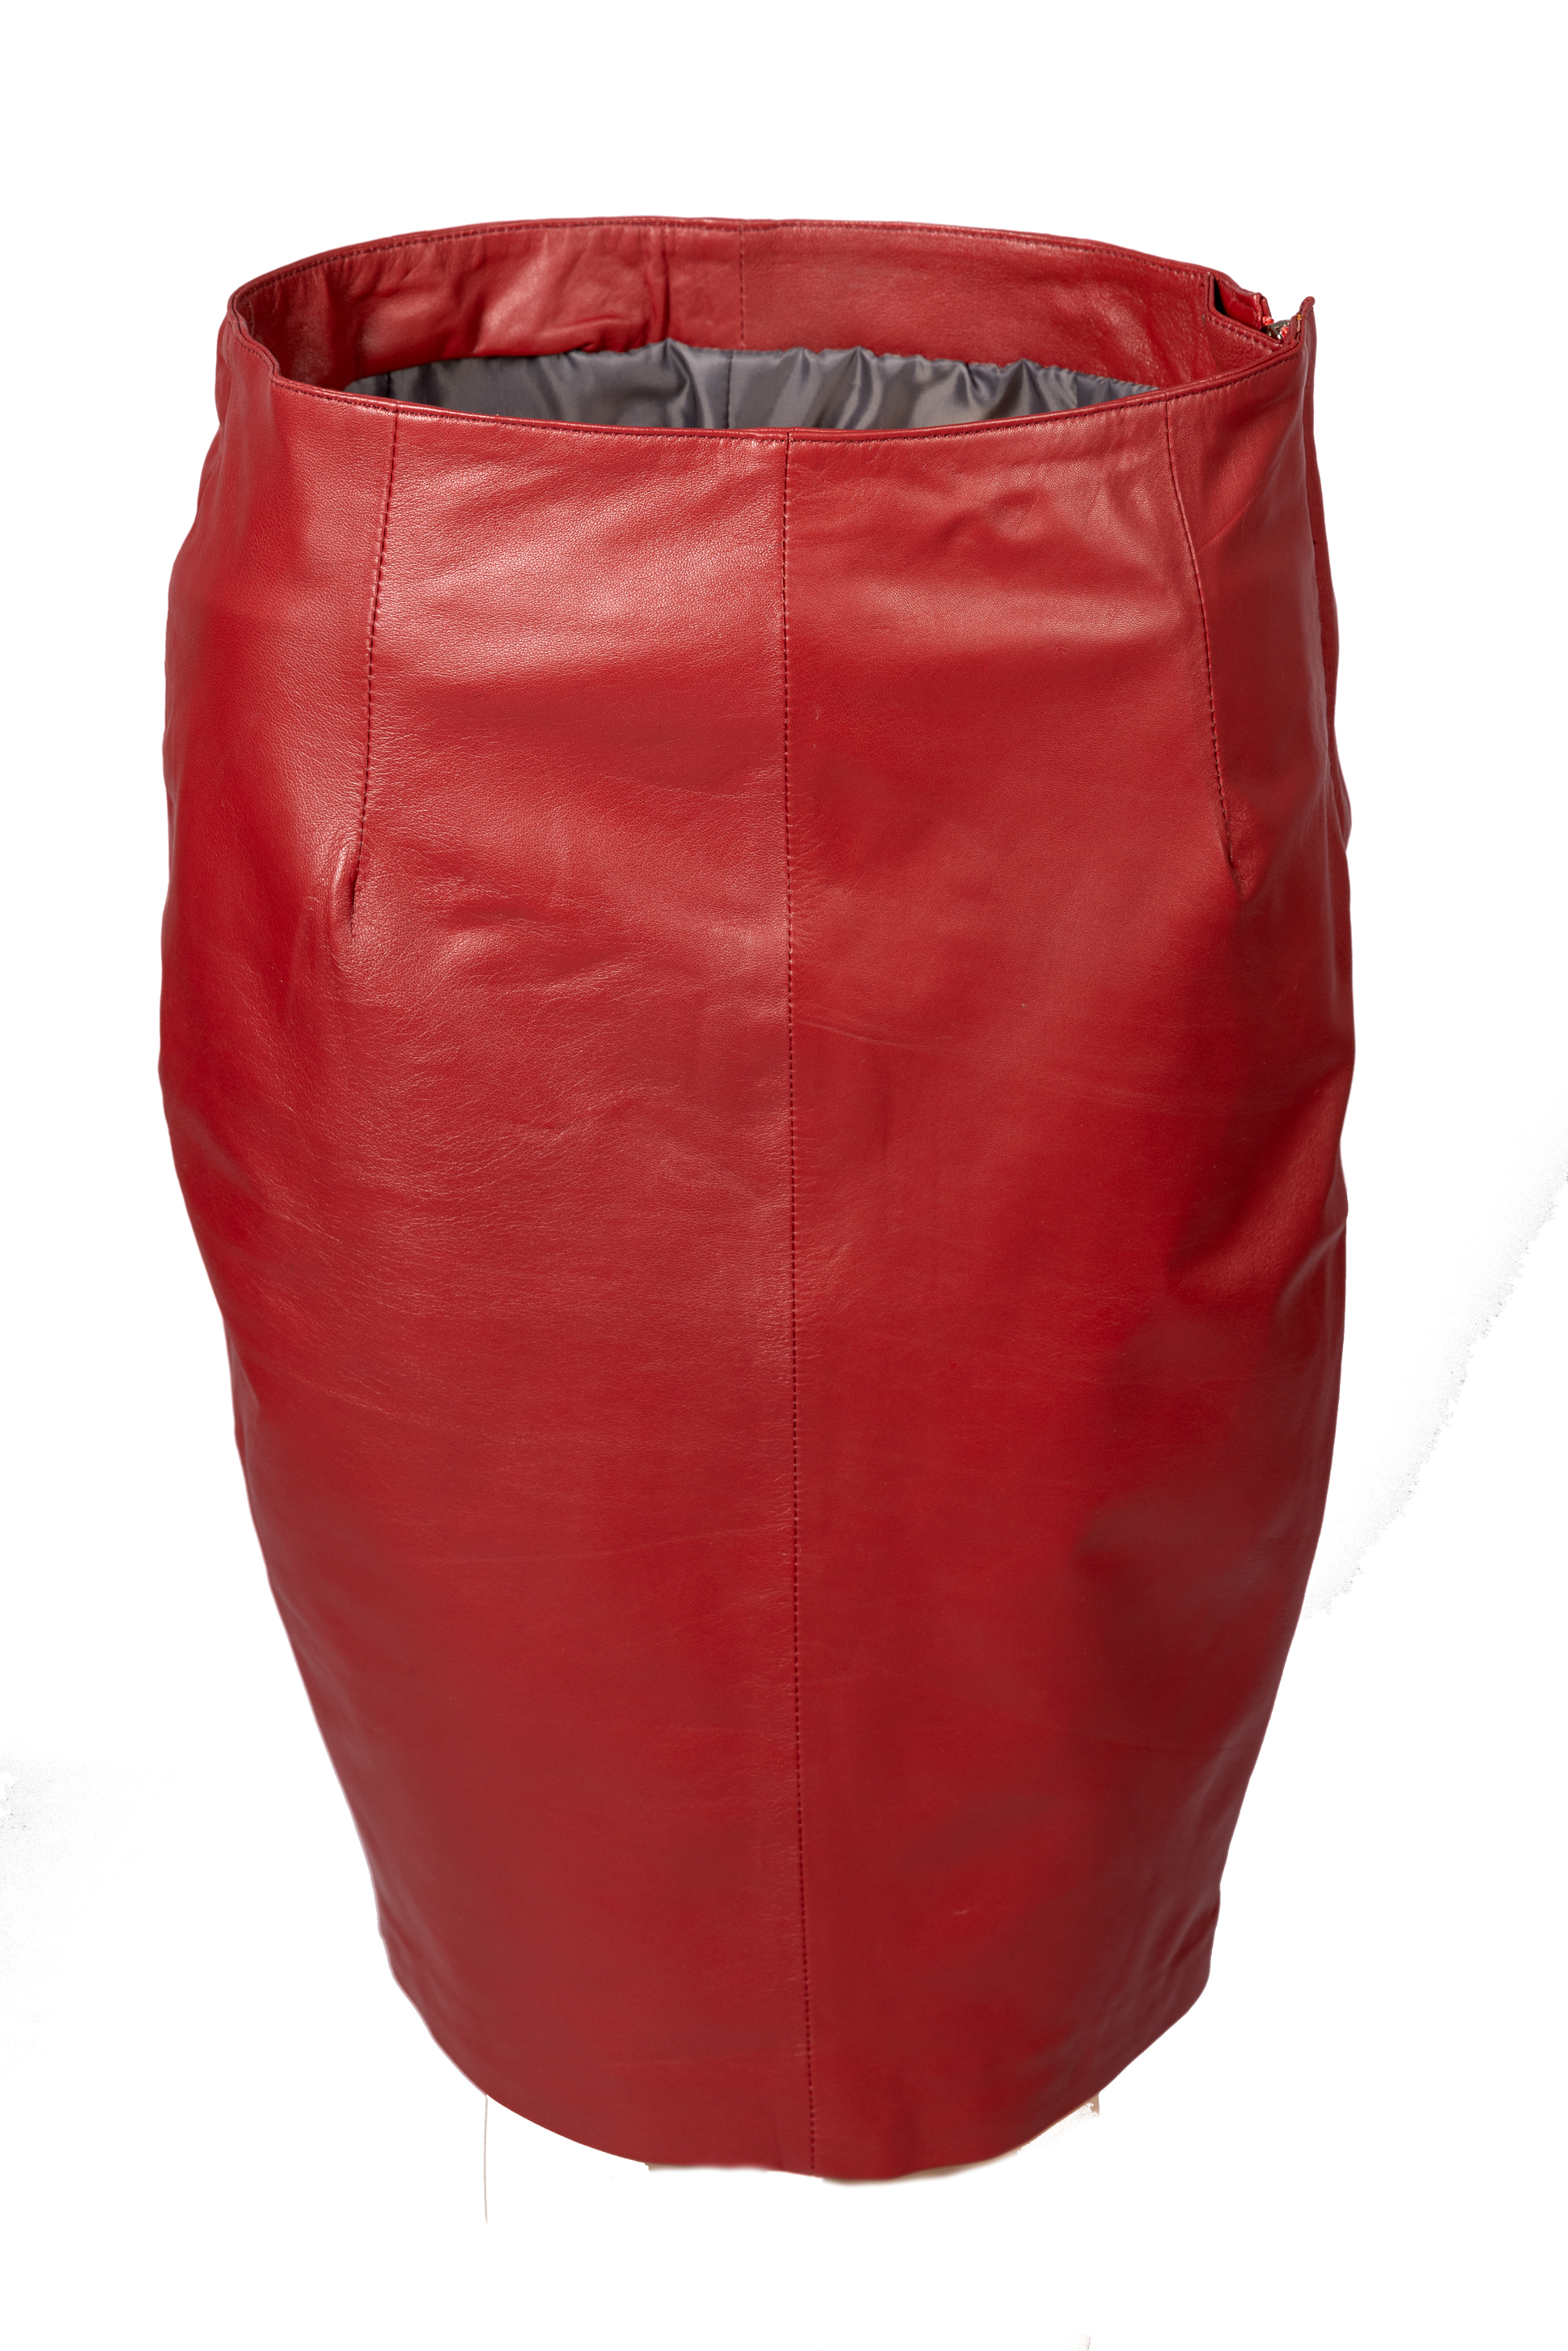 Leather Pencil Skirt made of  GENUINE Leather in elegant Dark Red